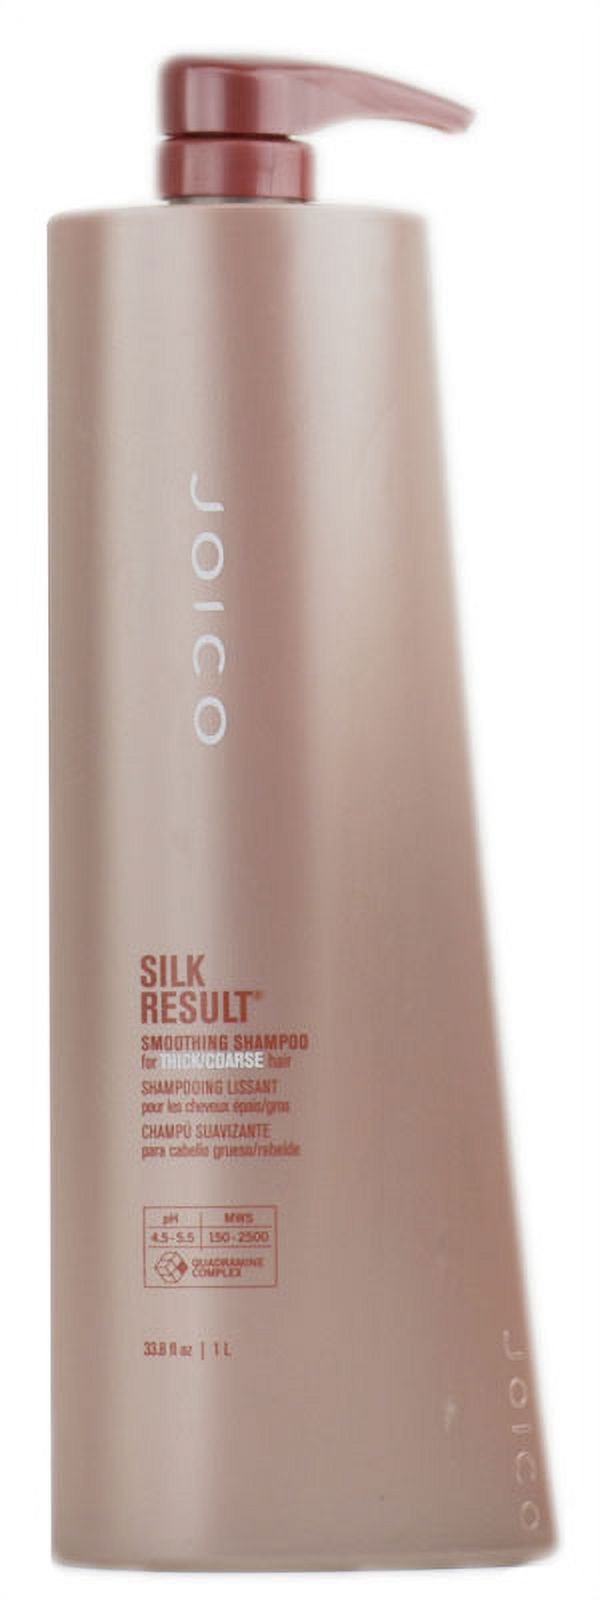 Joico Silk Result Smoothing Shampoo for Thick/Coarse Hair (Size : 33 oz - Thick/Coarse) - image 1 of 1